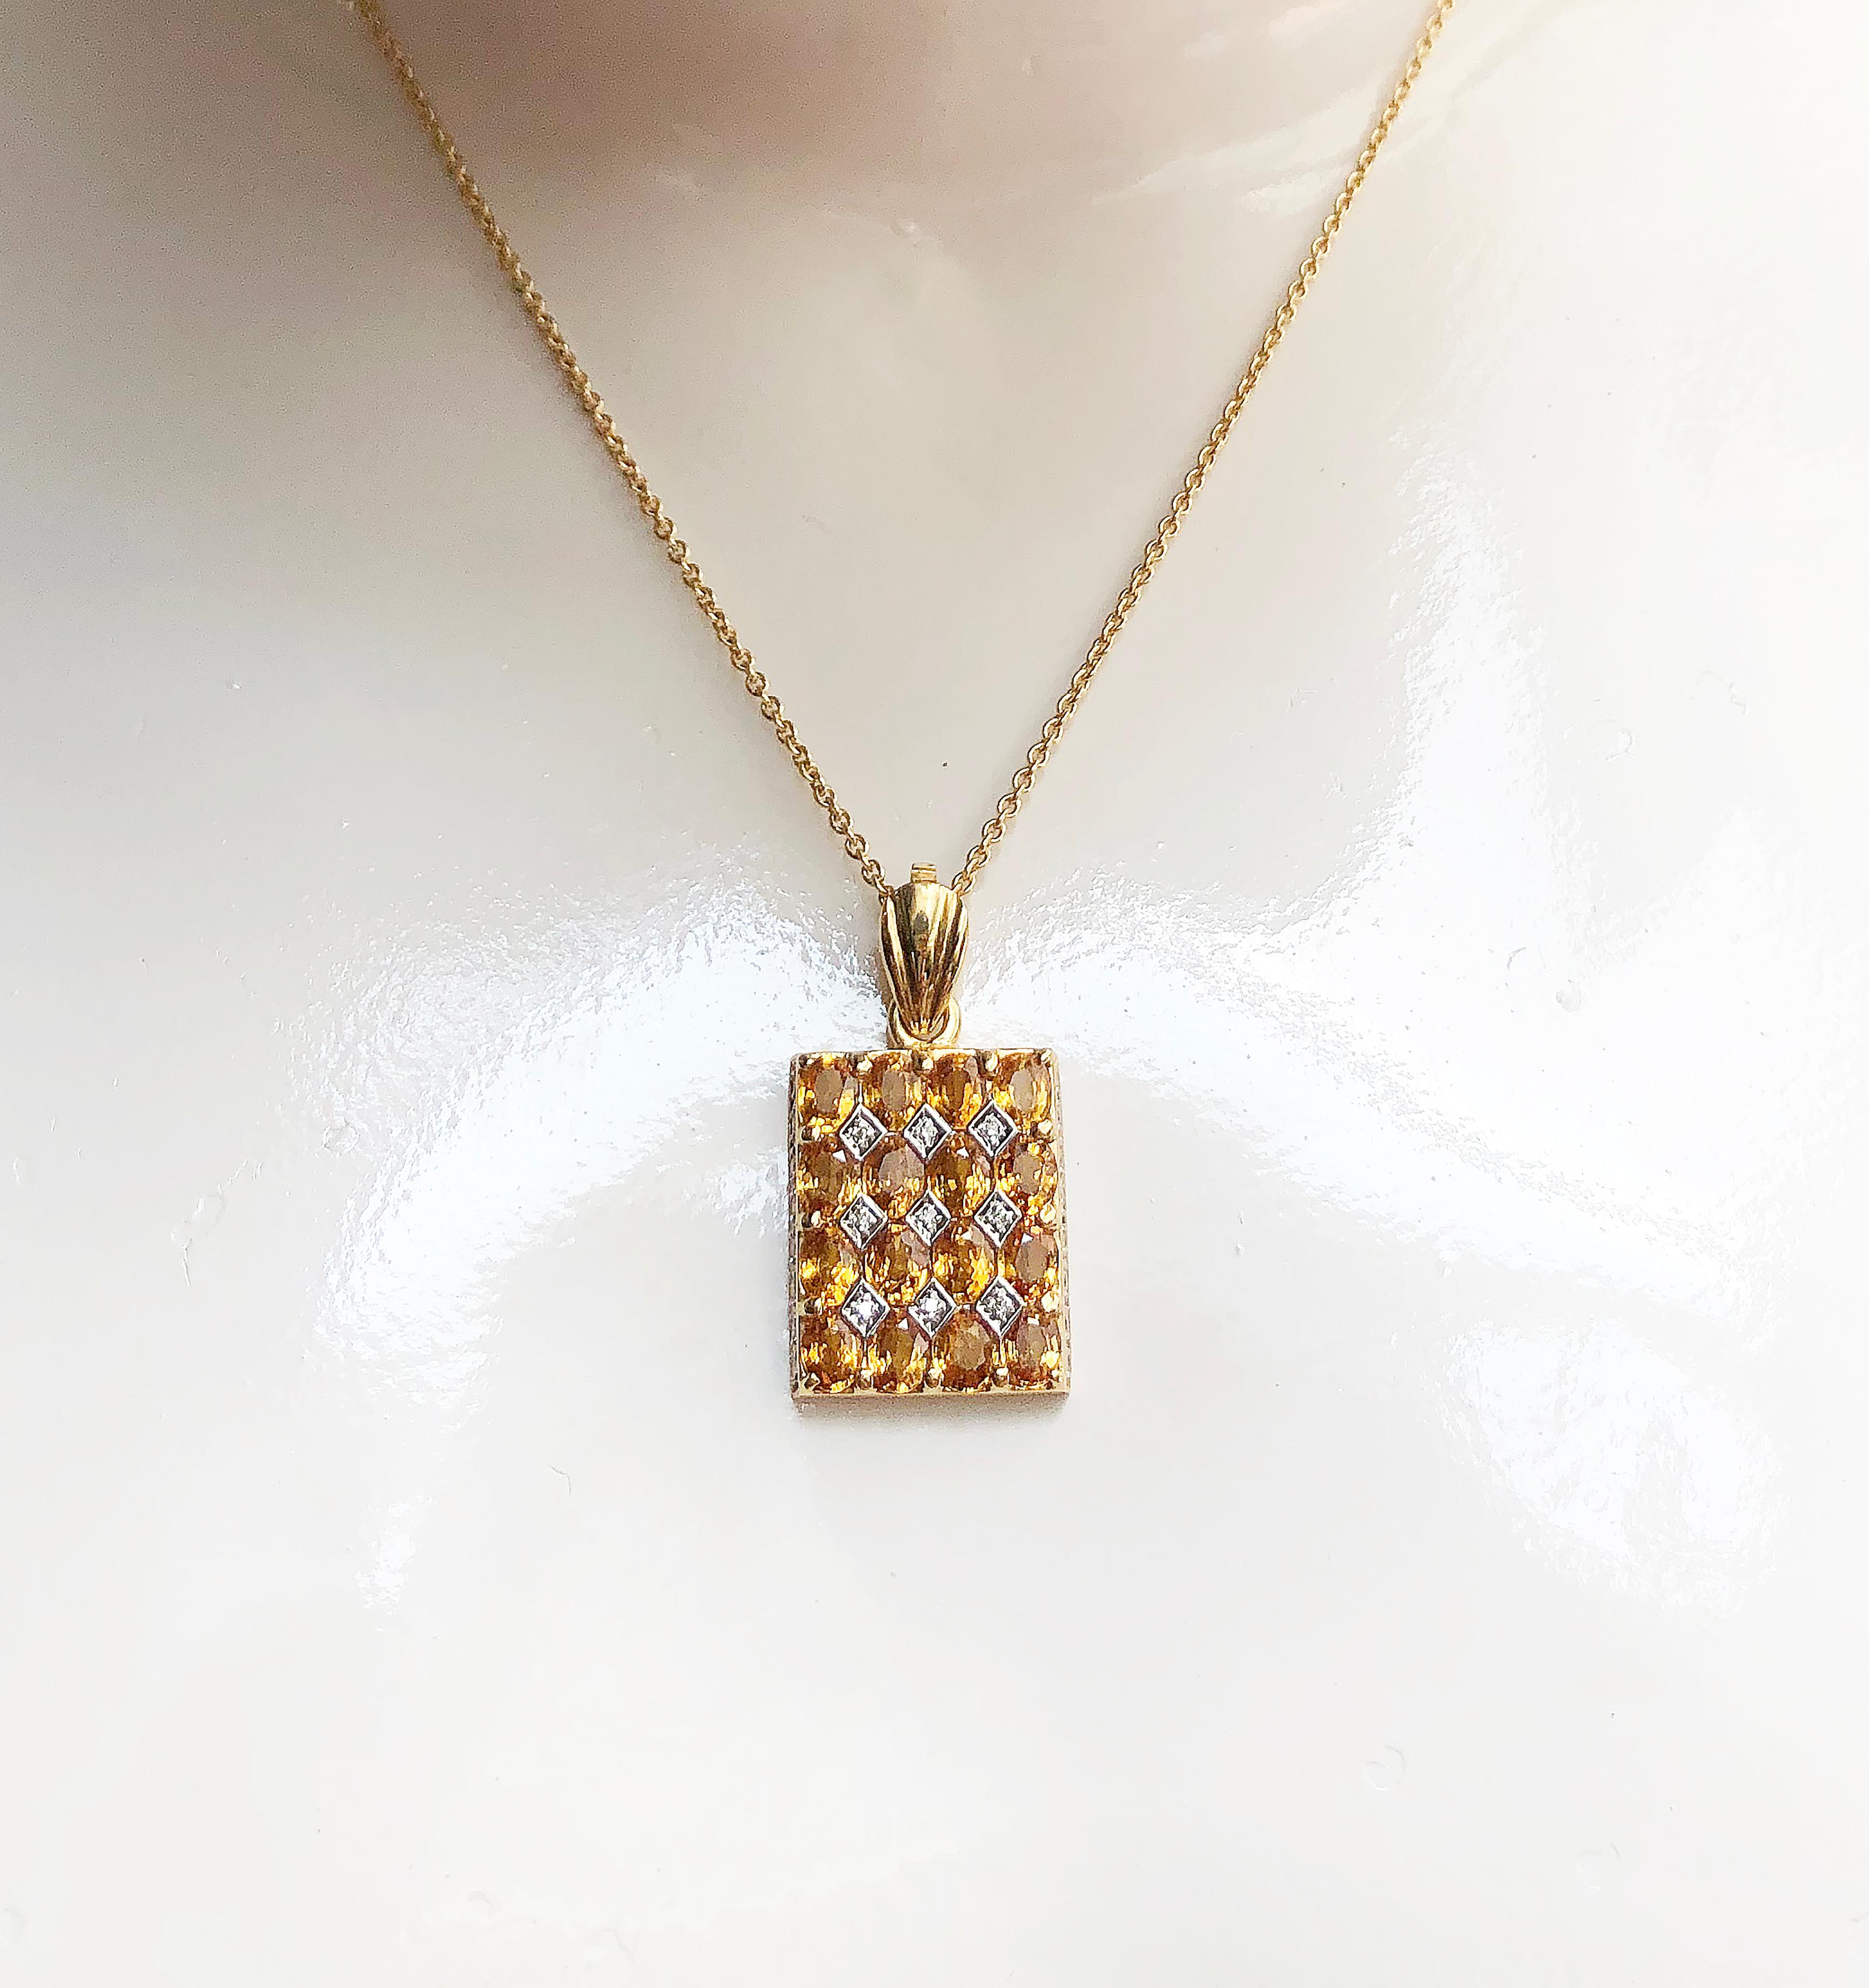 Yellow Sapphire 5.40 carats with Diamond 0.22 carat Pendant set in 18 Karat Gold Settings
(chain not included)

Width: 2.6 cm
Length: 3.0 cm 

